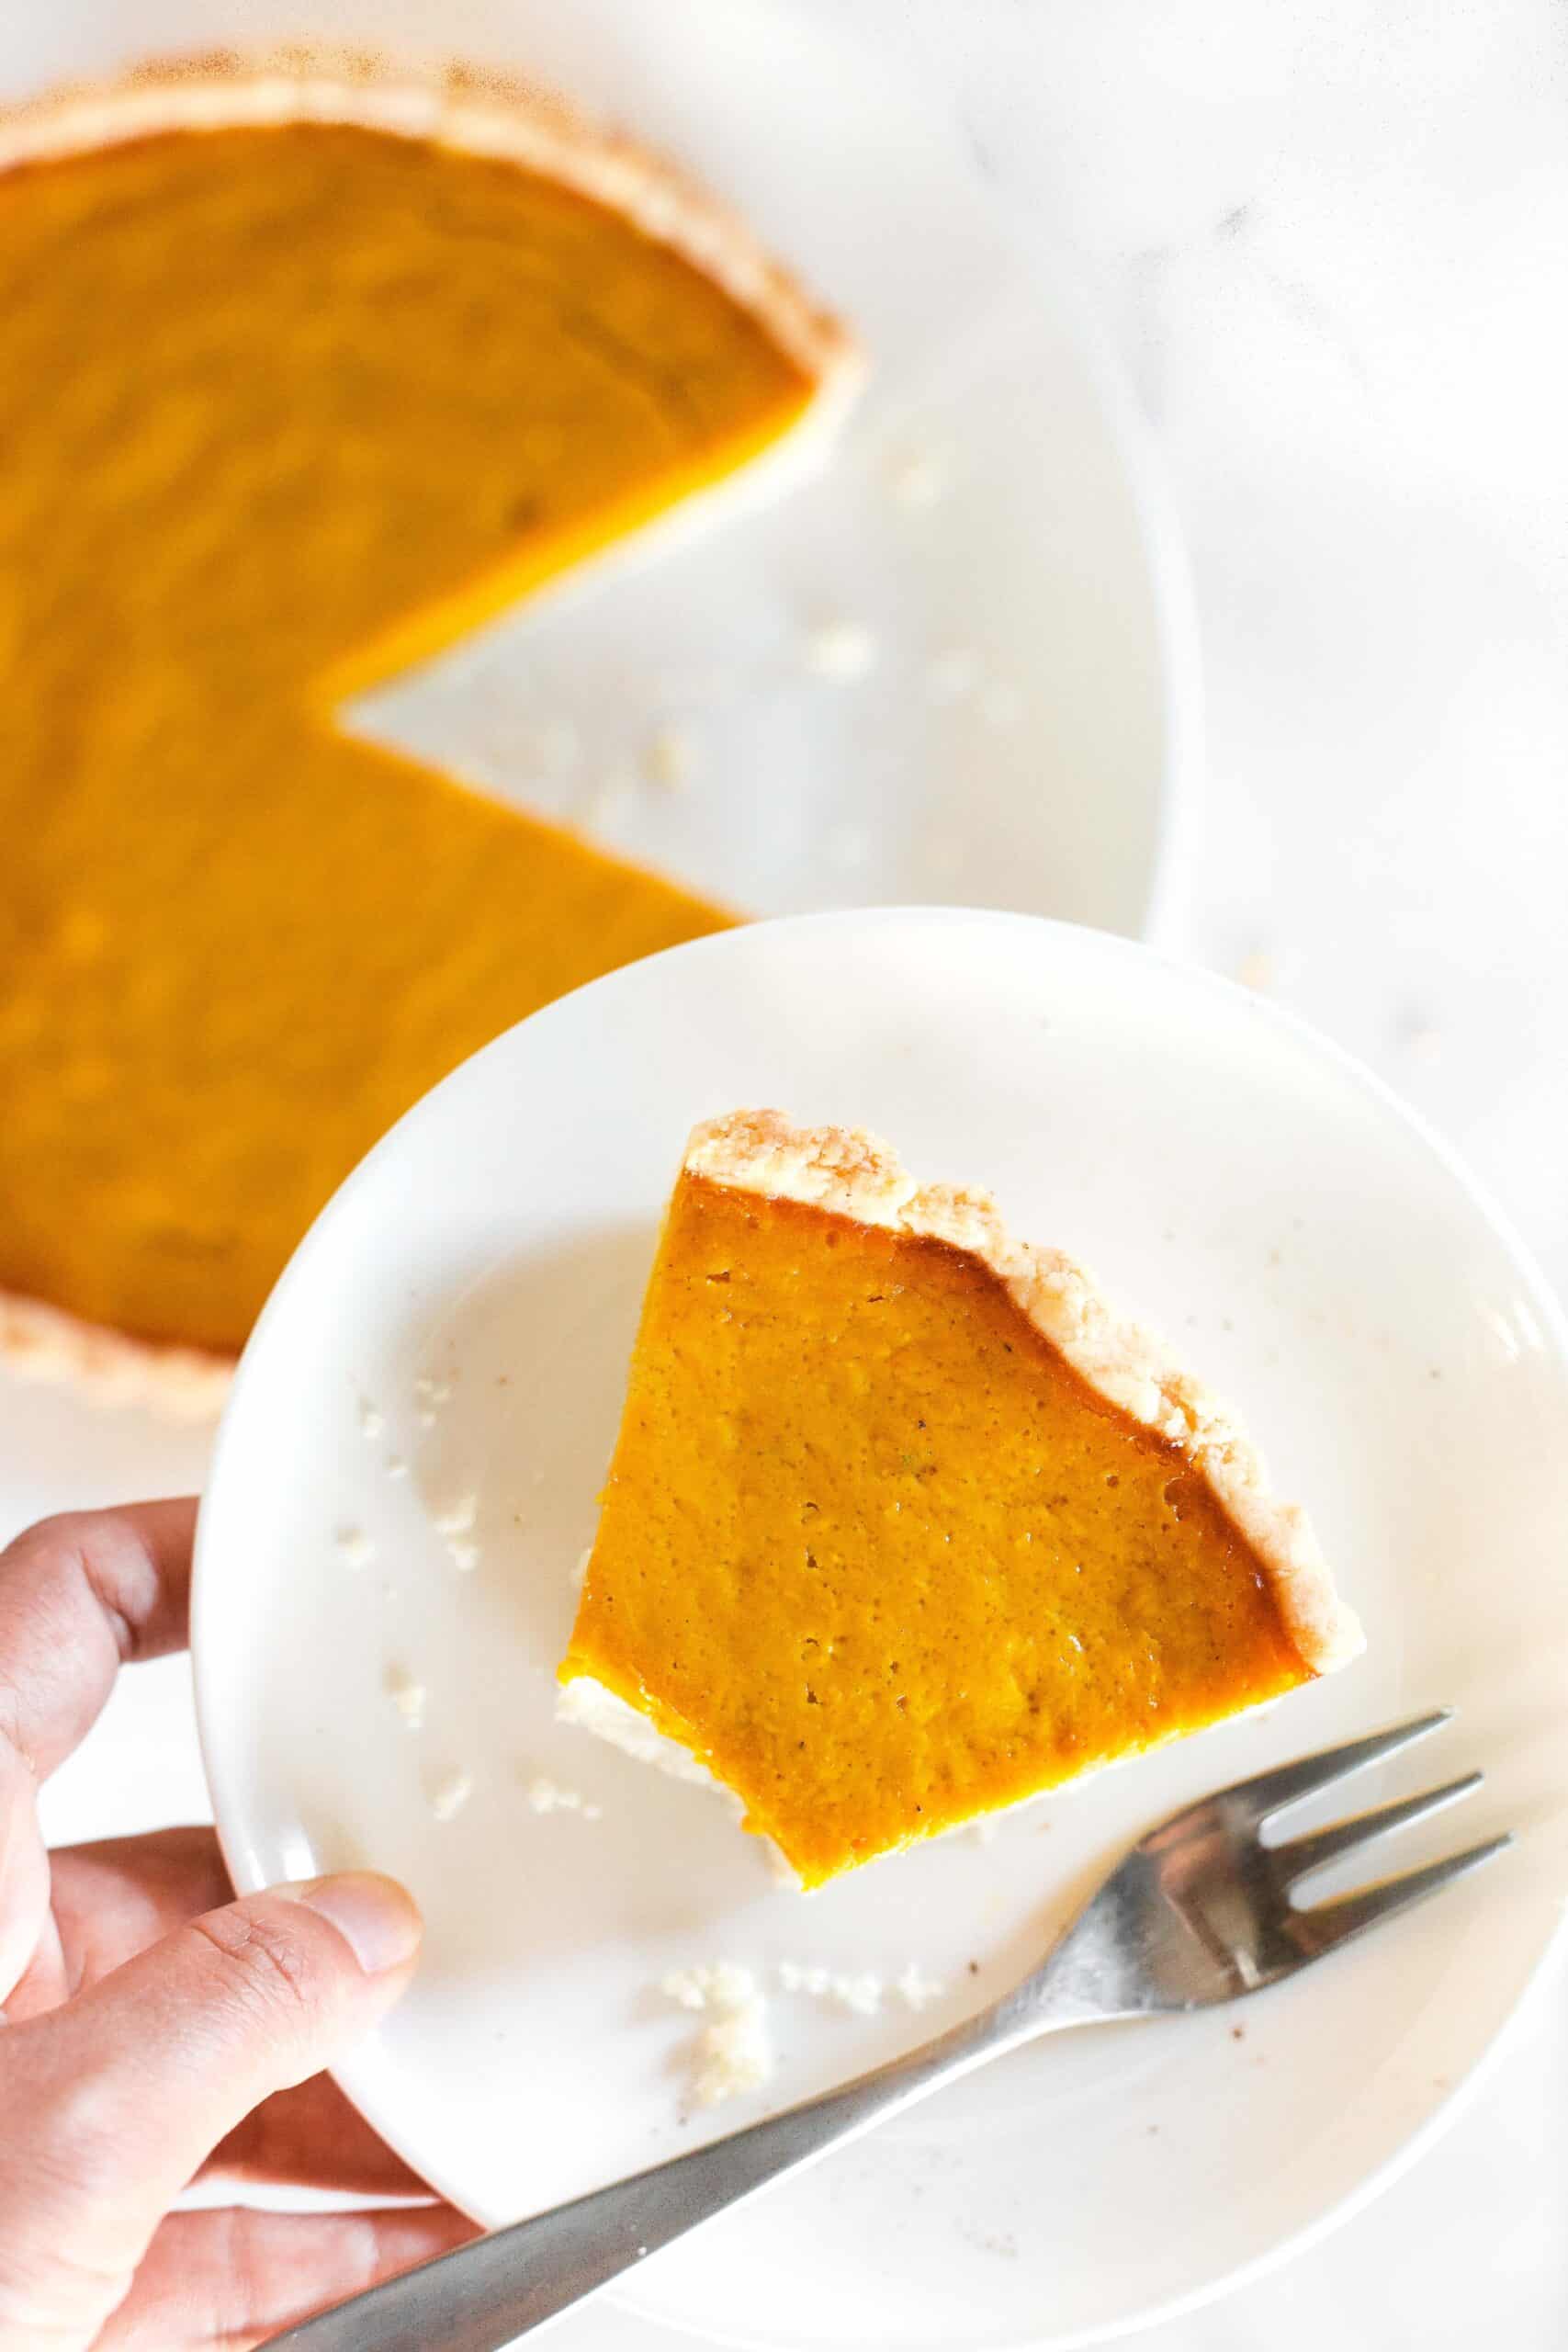 Holding up a plate with a slice of half-eaten gluten-free sweet potato pie.